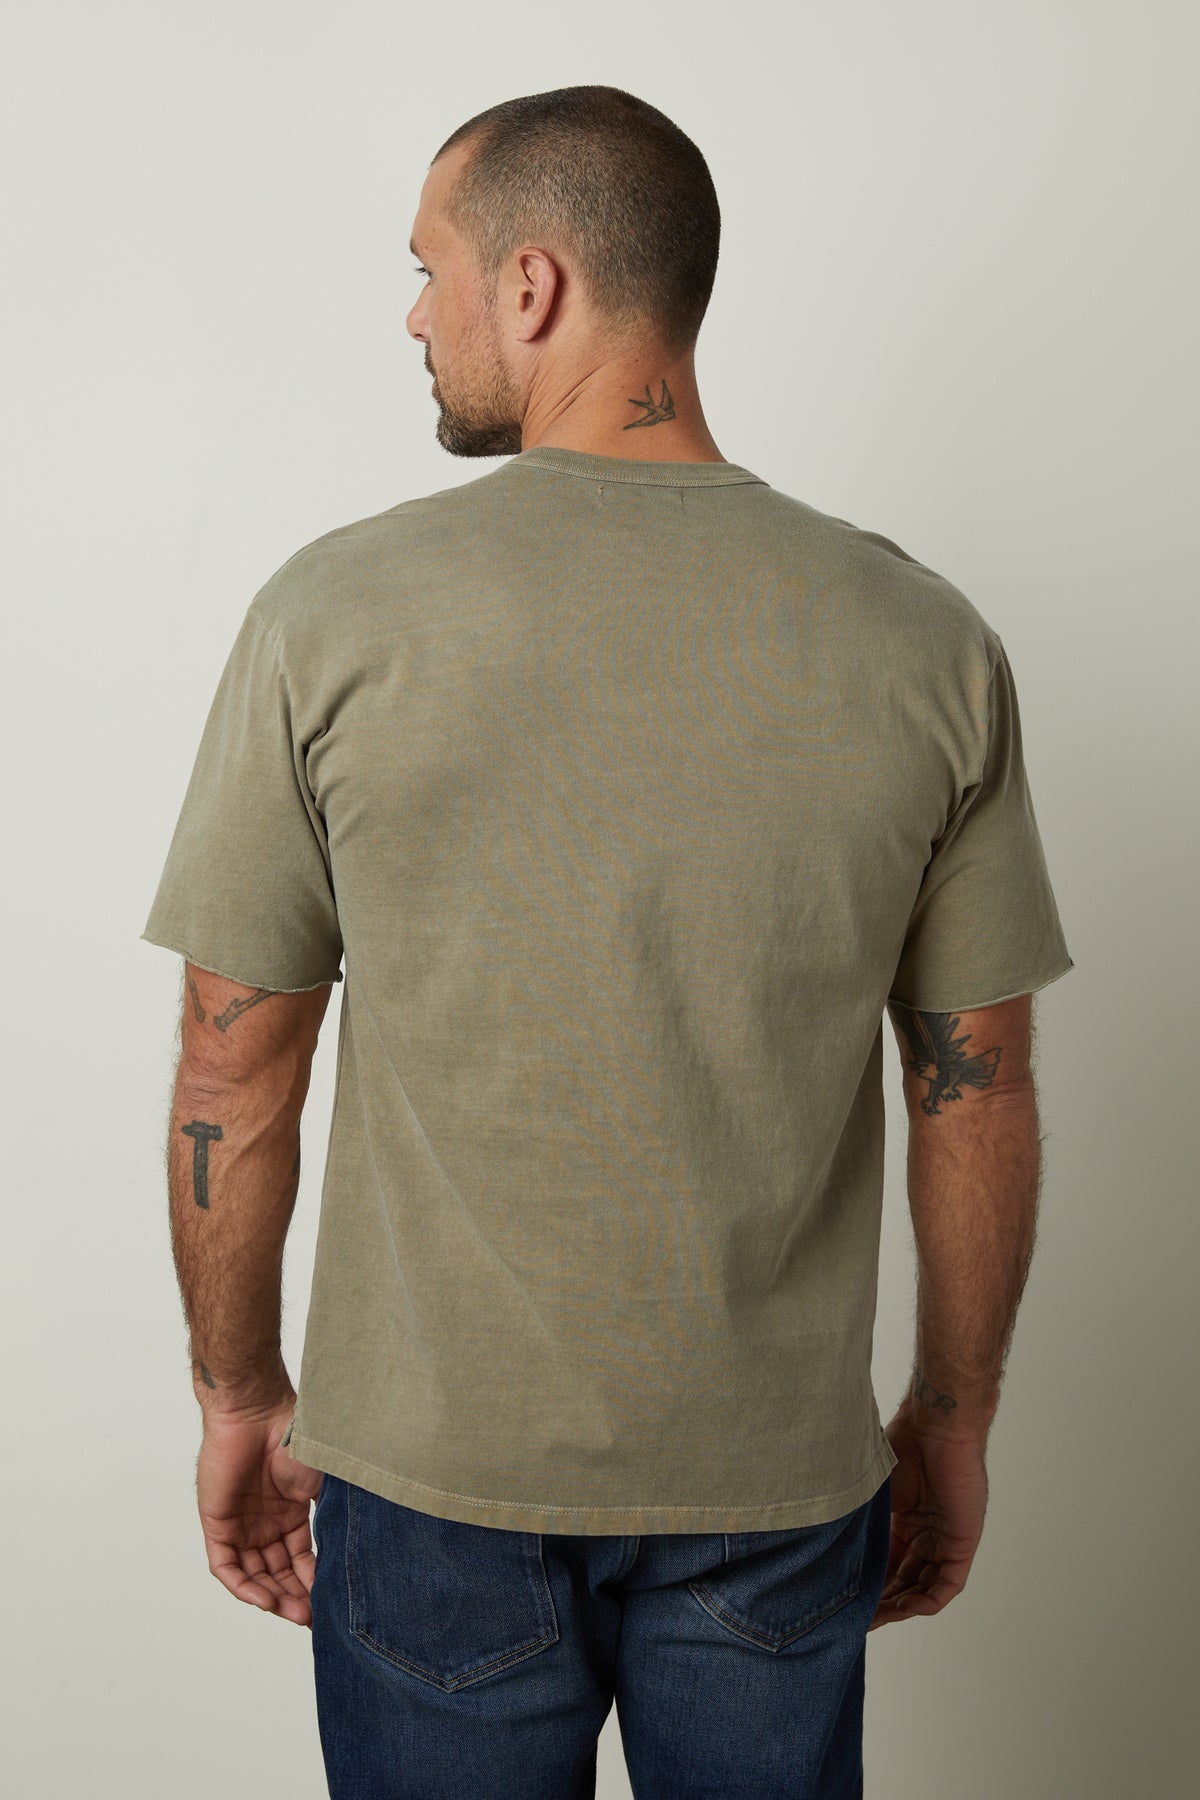 The back view of a man wearing a Velvet by Graham & Spencer NEPTUNE CREW NECK POCKET TEE.-26827673206977